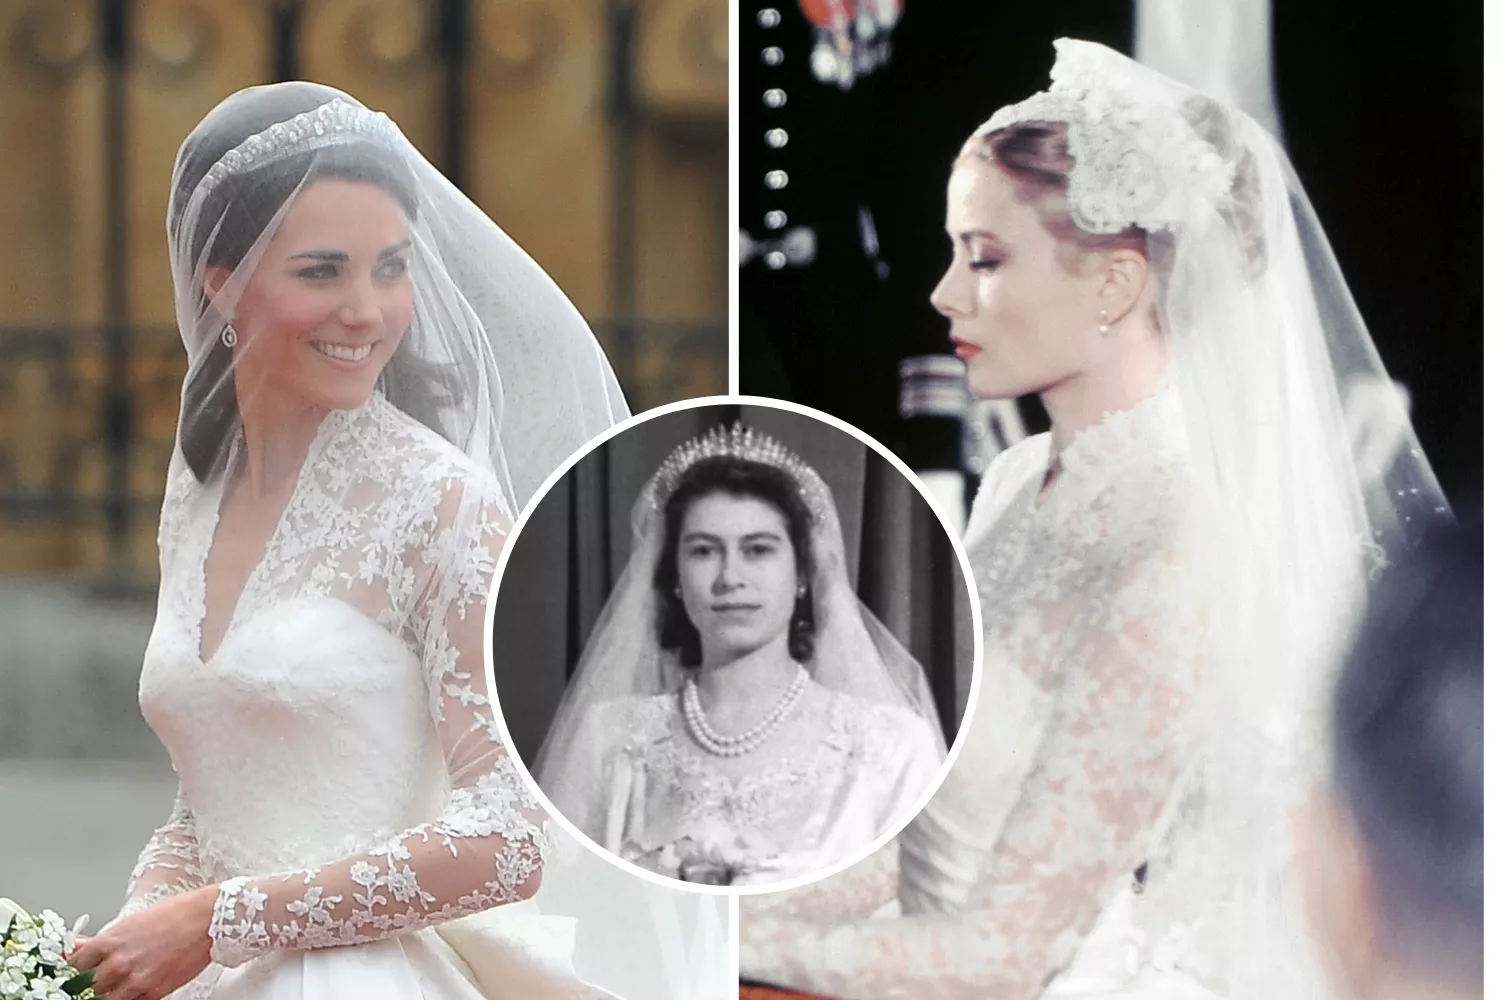 All About Kate Middleton's Wedding Dress